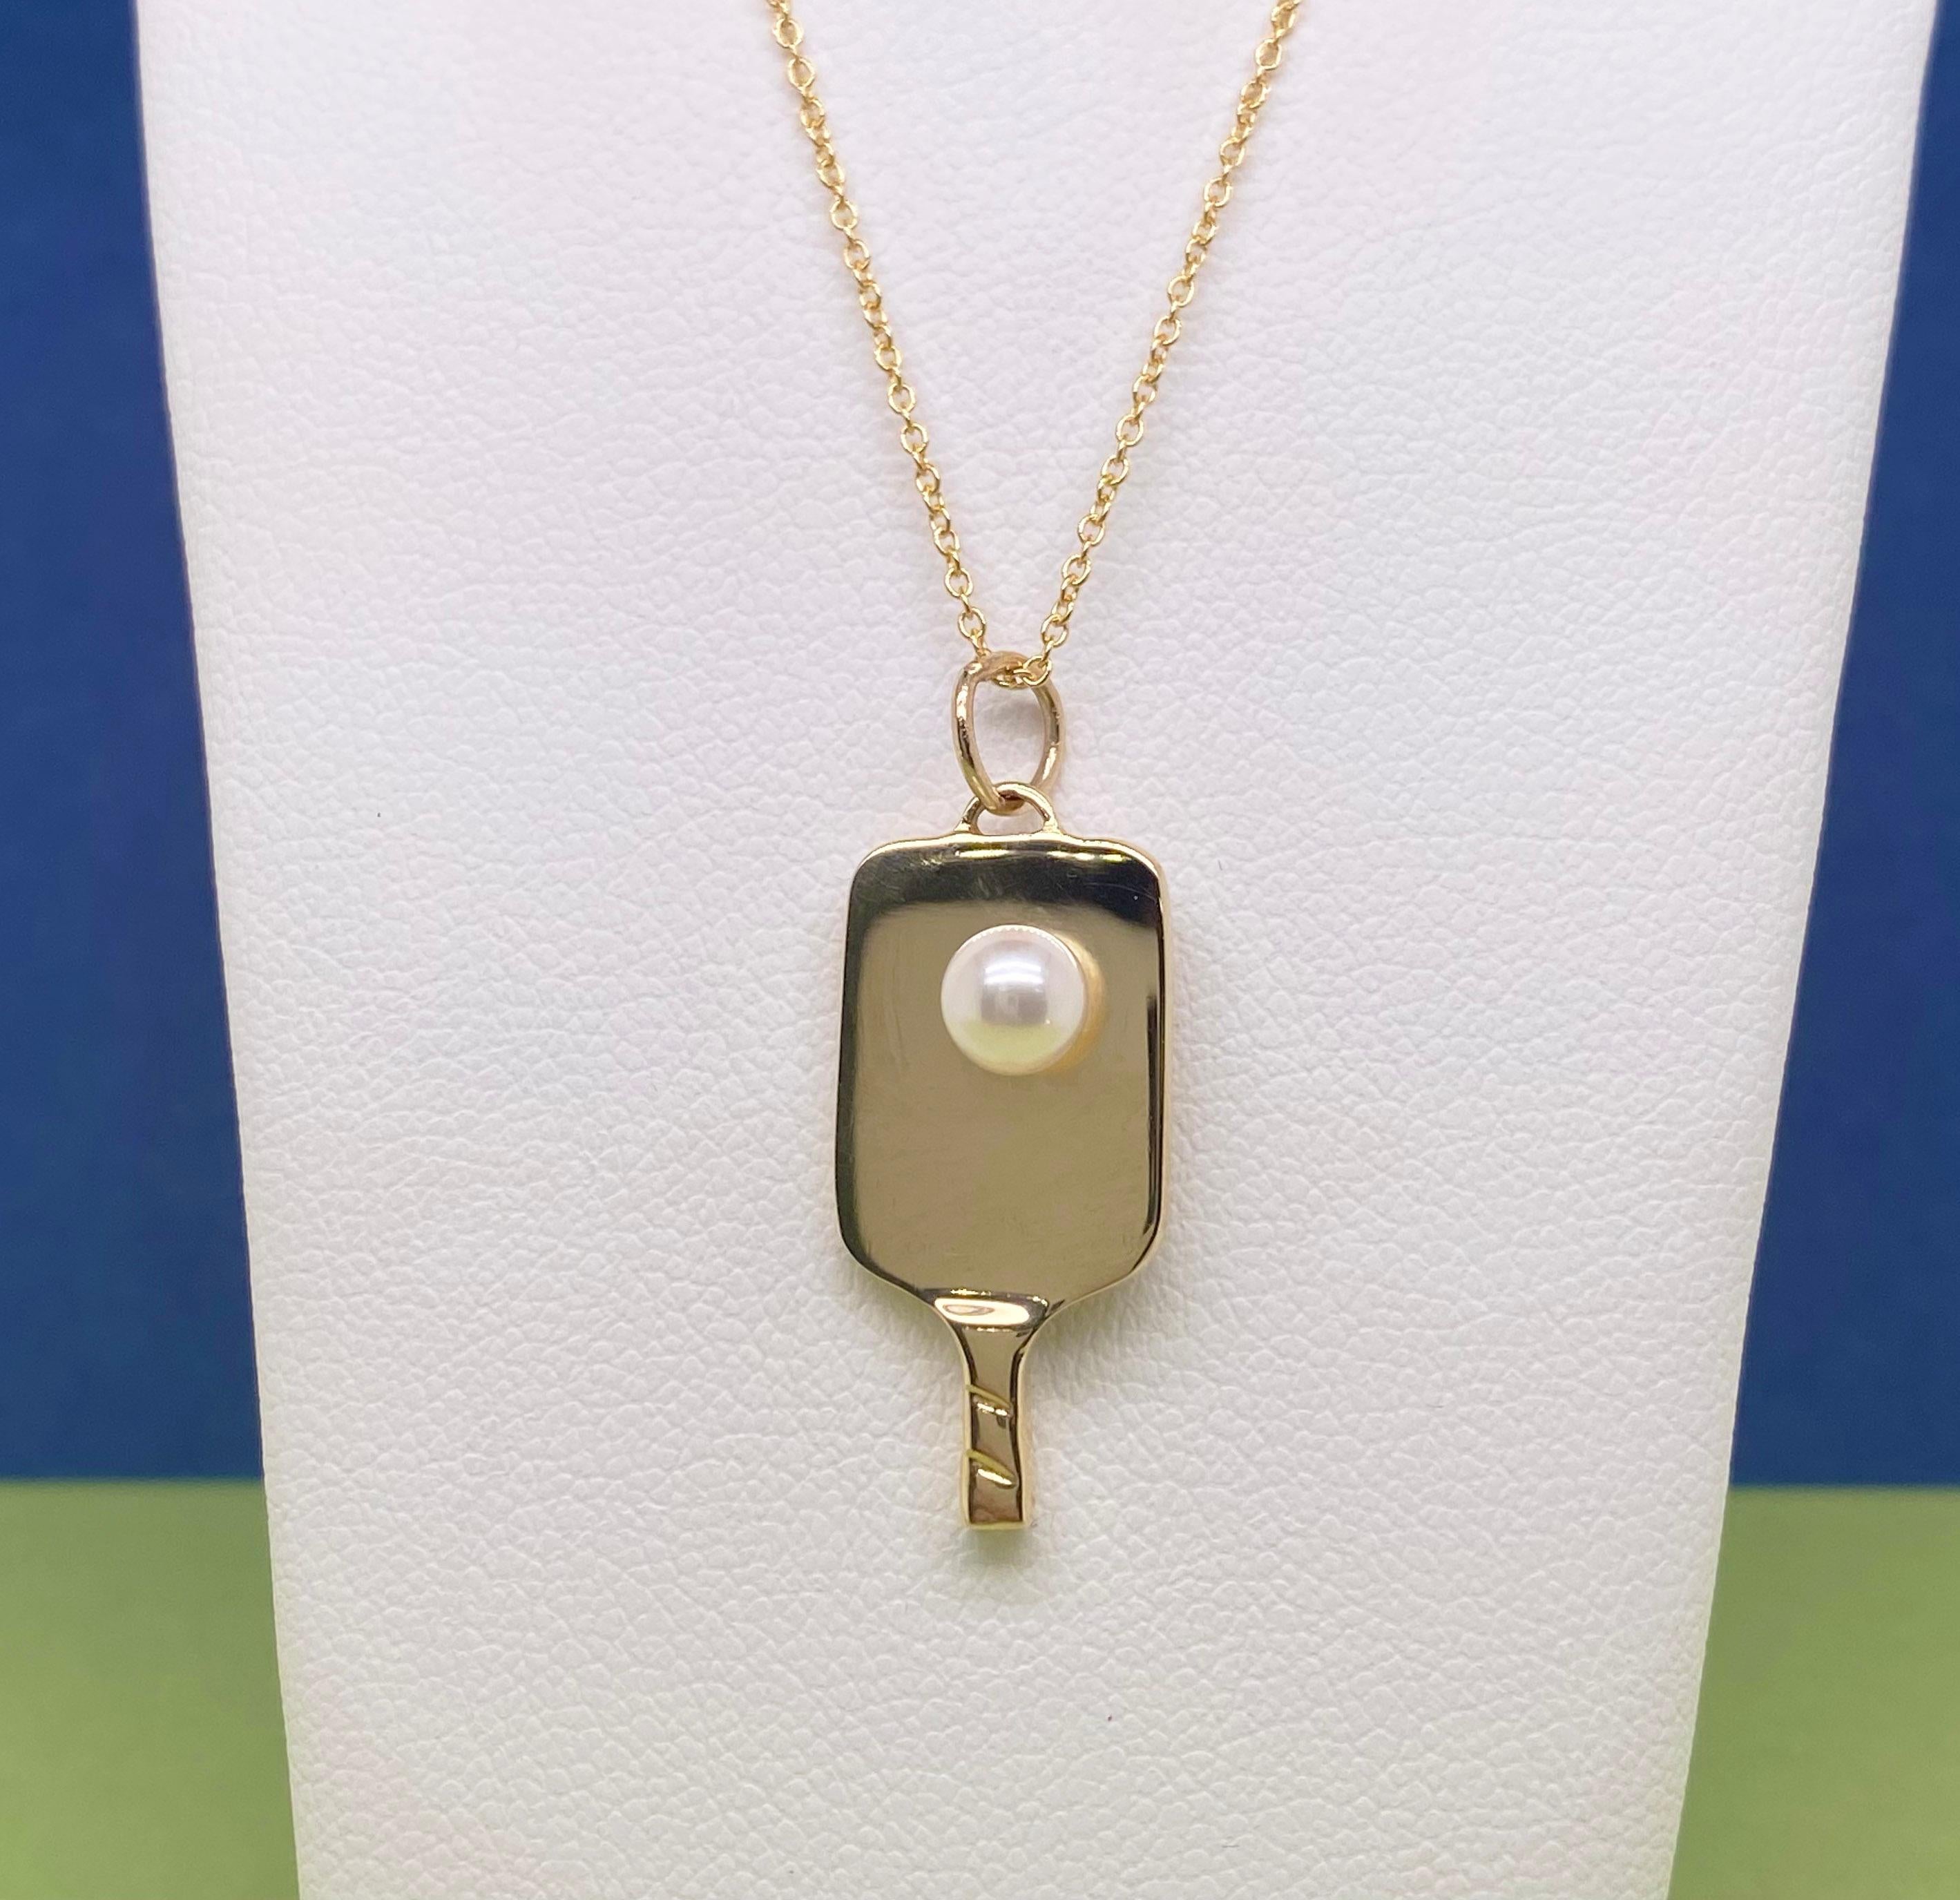 Pickleball Paddle Pendant w genuine cultured pearls in 14 karat yellow gold.  If you love Pickleball, you will love showing off this pendant to all your friends. The details for this beautiful necklace are listed below:
Metal Quality: 14 karat